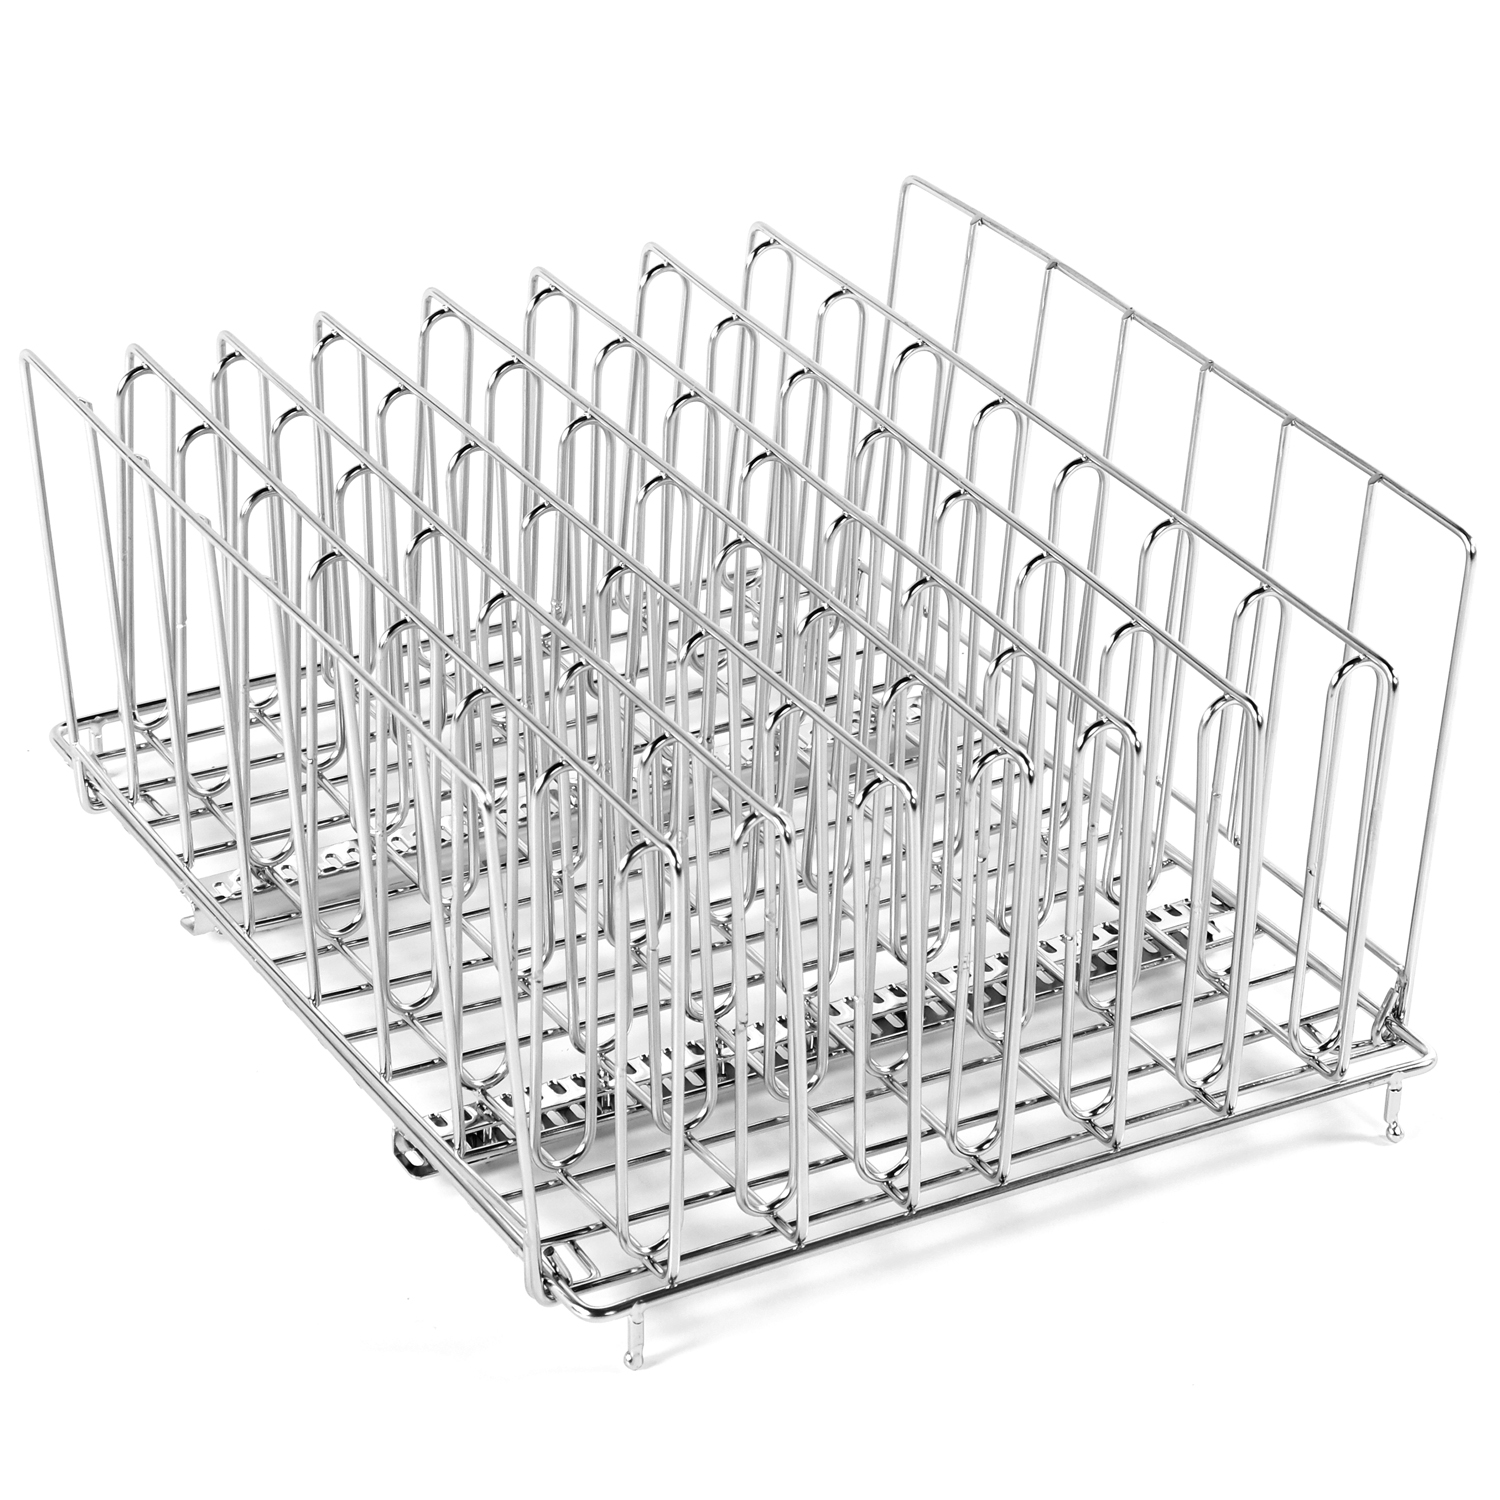 LIPAVI N10 Sous Vide Rack White Polycarbonate with 316L Stainless steel weights Adjustable Fits C10 Container Collapsible Ensures even warming with Sous Vide Cooking 